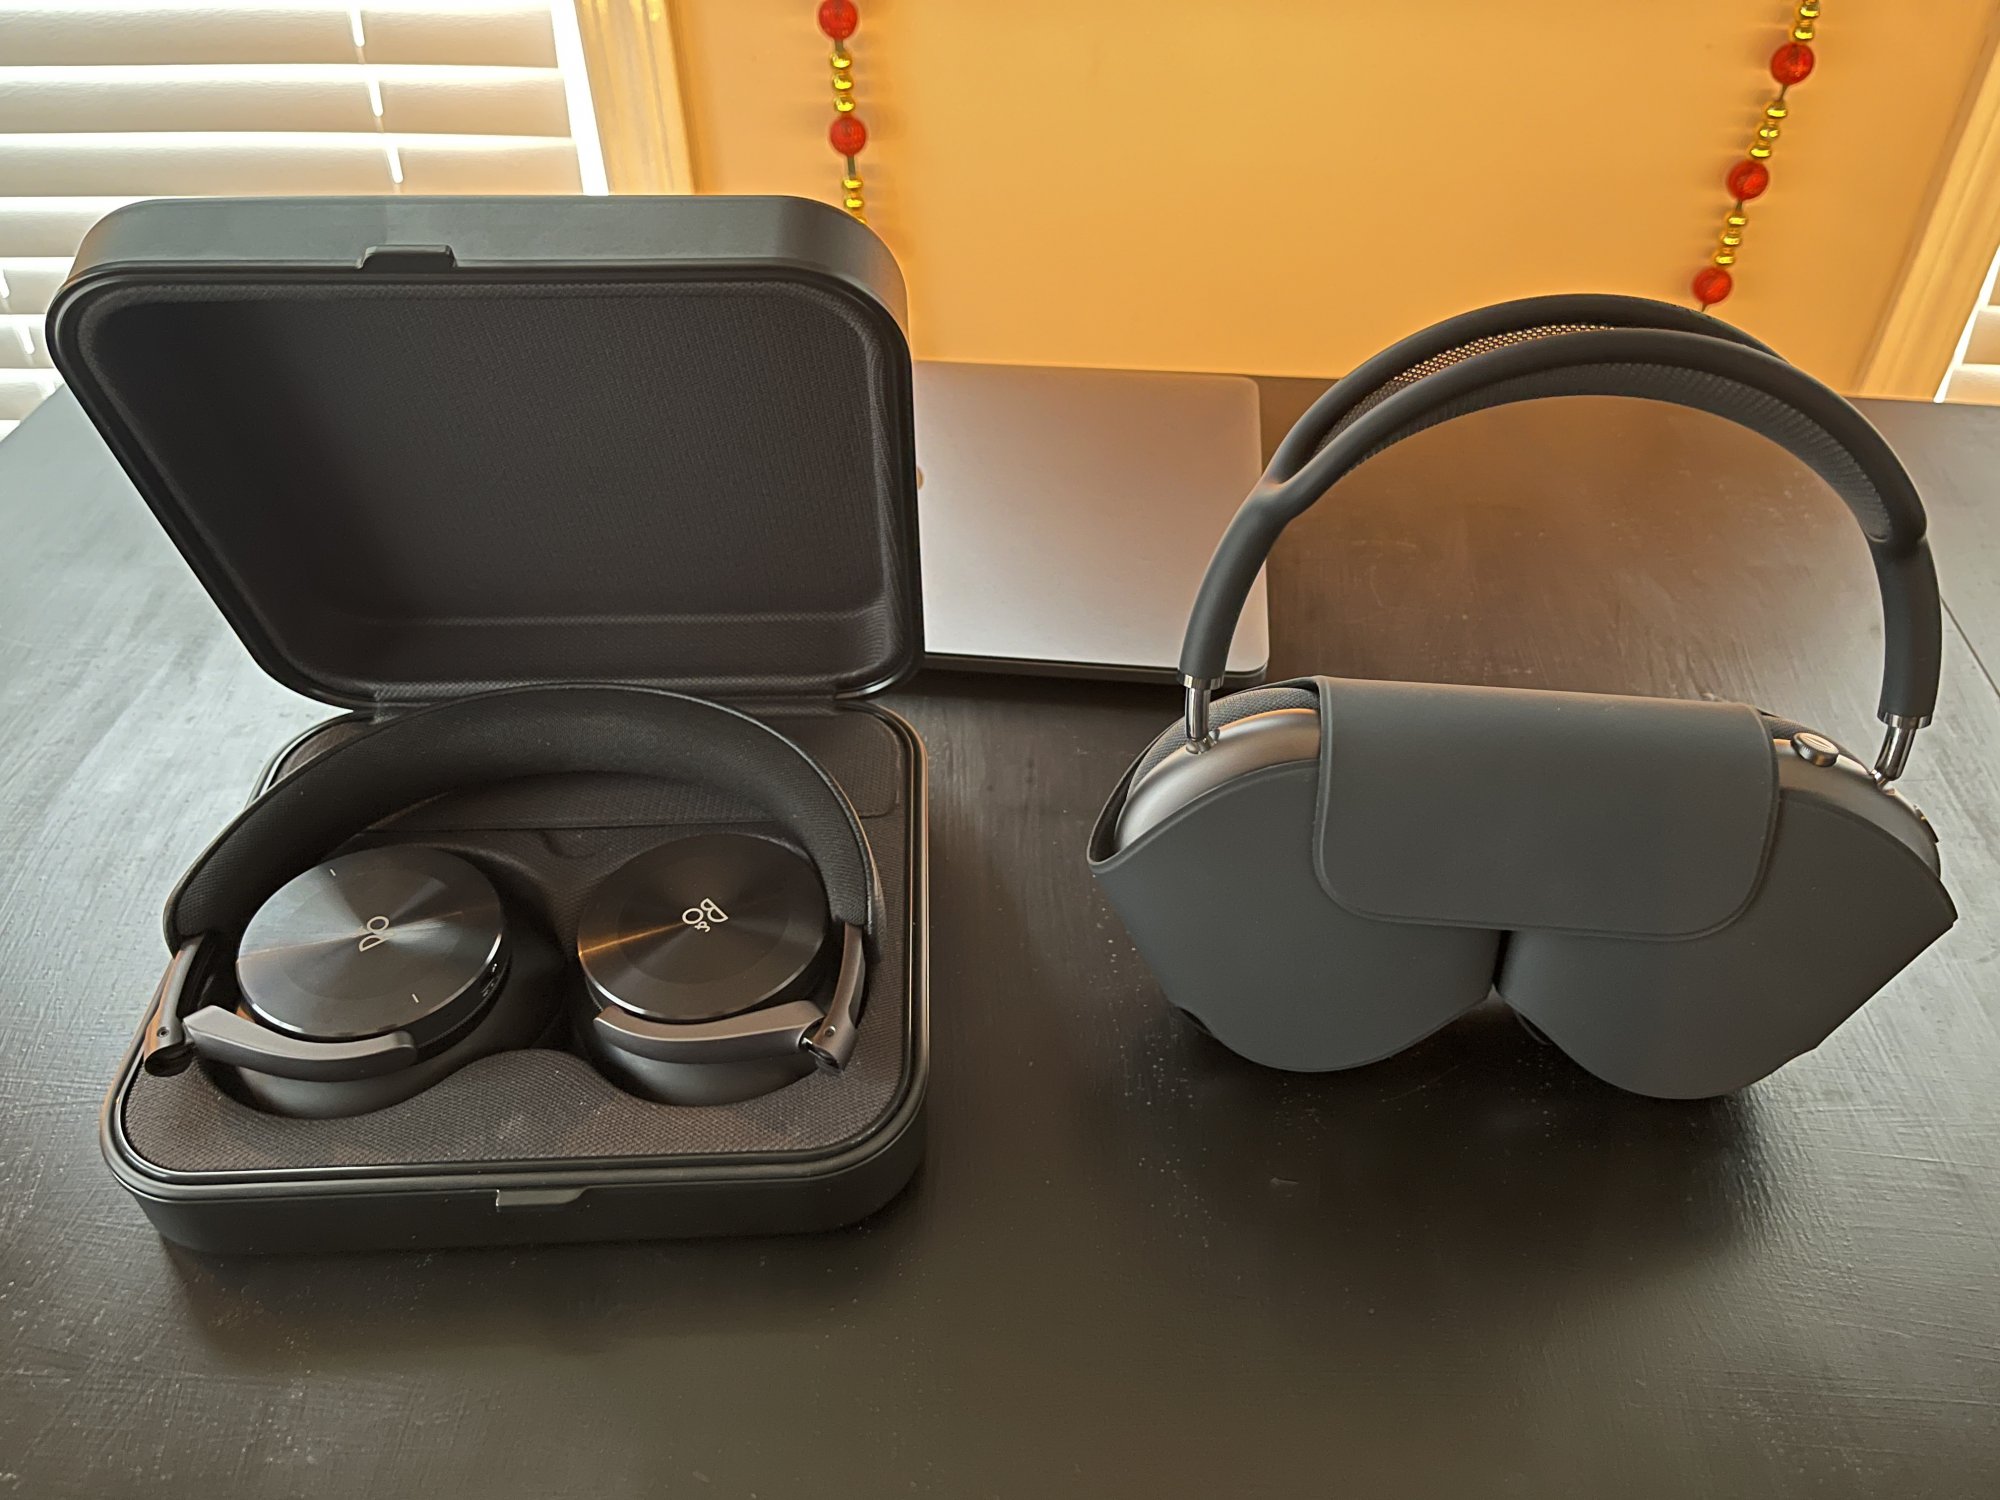 AirPods Max Leather Cases Review - MacRumors